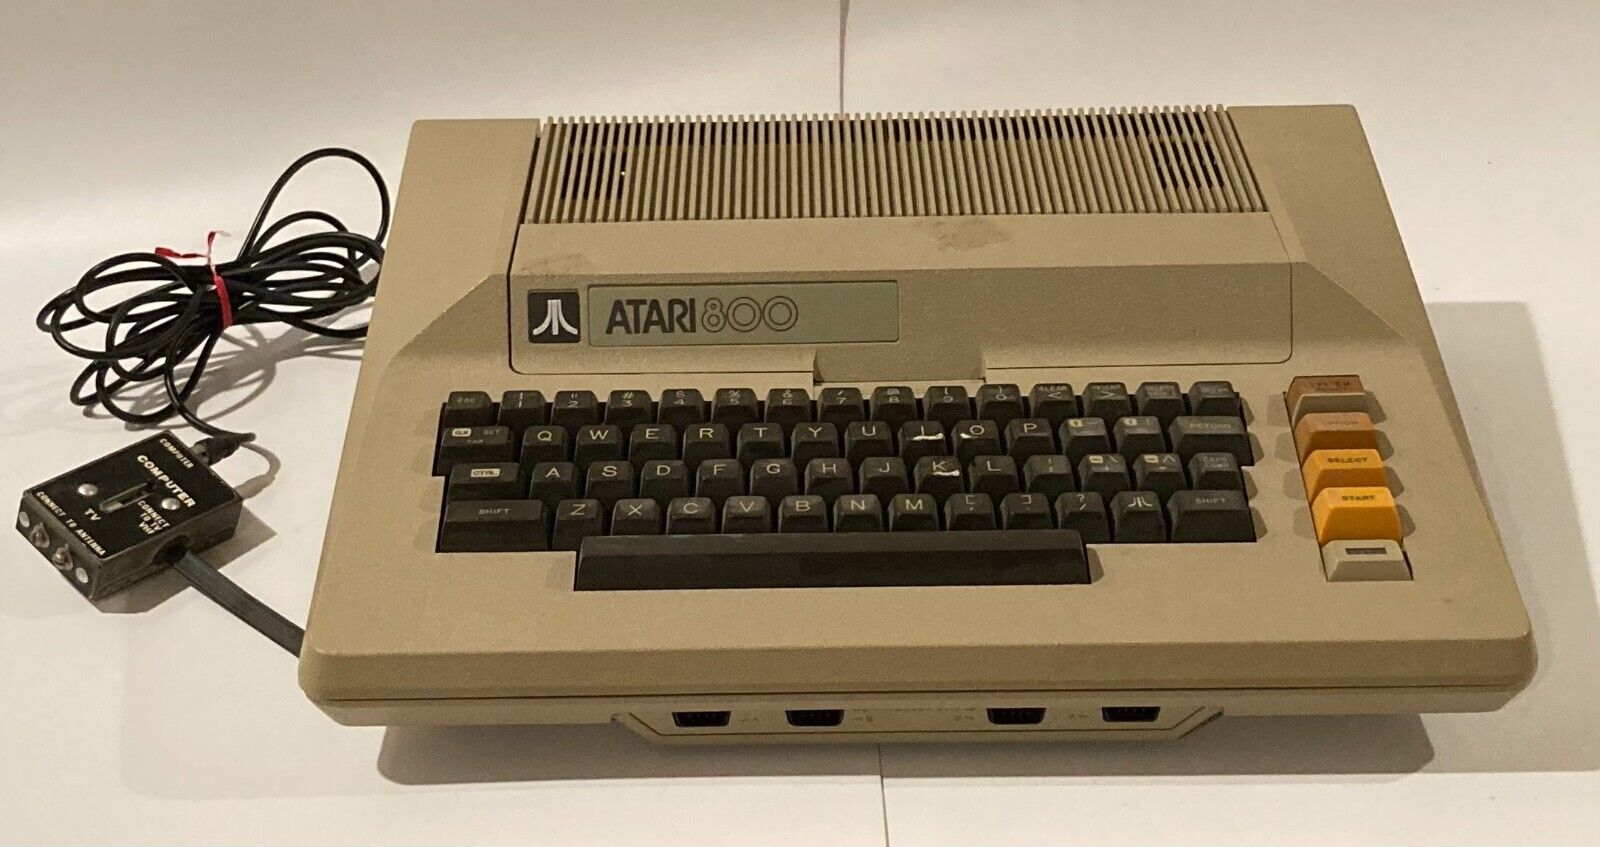 Atari 800 Home Computer with 410 Program Recorder and Manual USED READ BCL